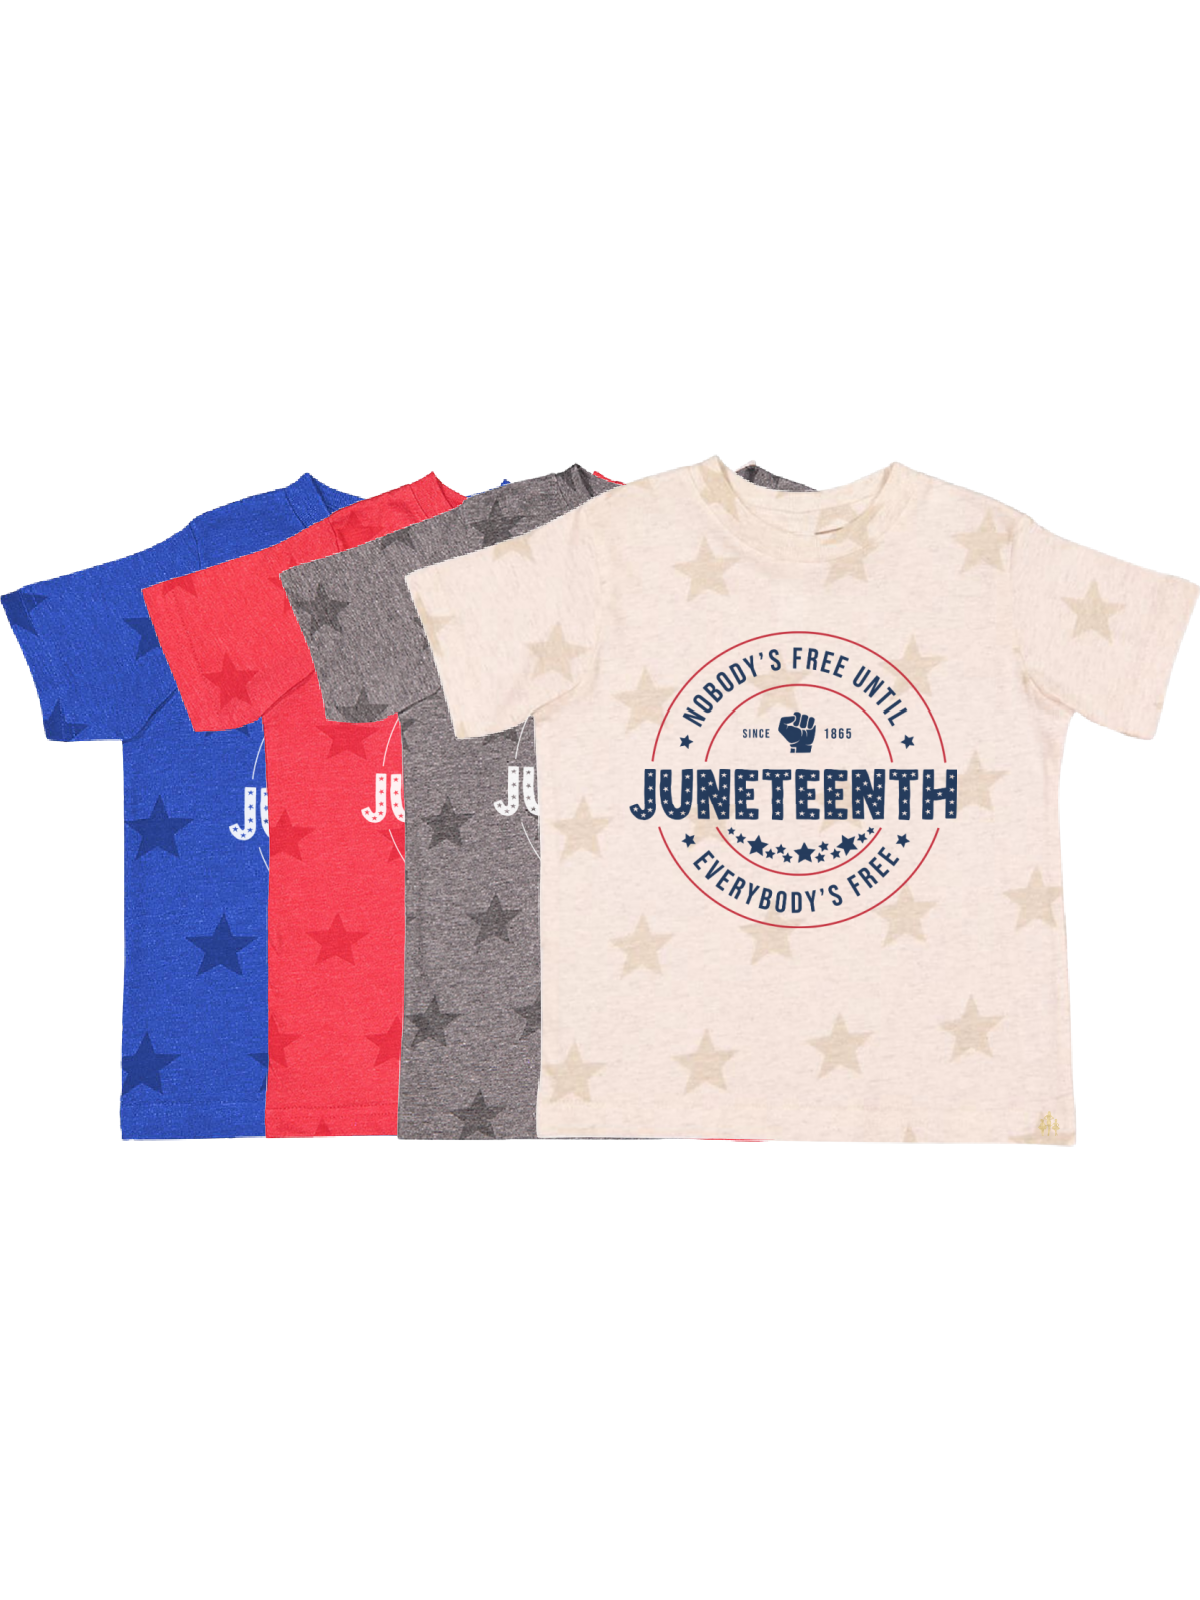 Nobody's Free Until Everybody's Free Kids Juneteenth Shirts in Natural, Gray, Red, and Blue